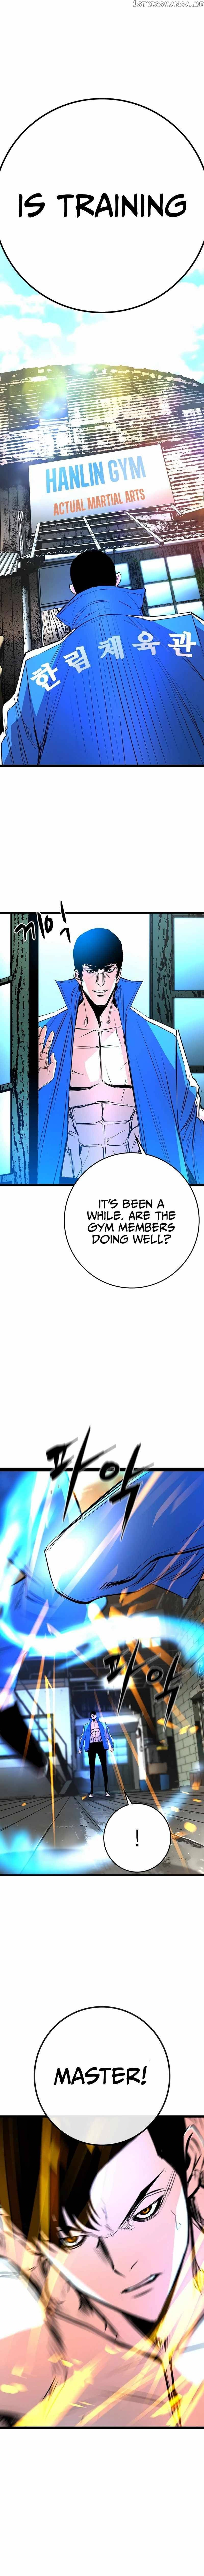 Hanlim Gym Chapter 127 page 16